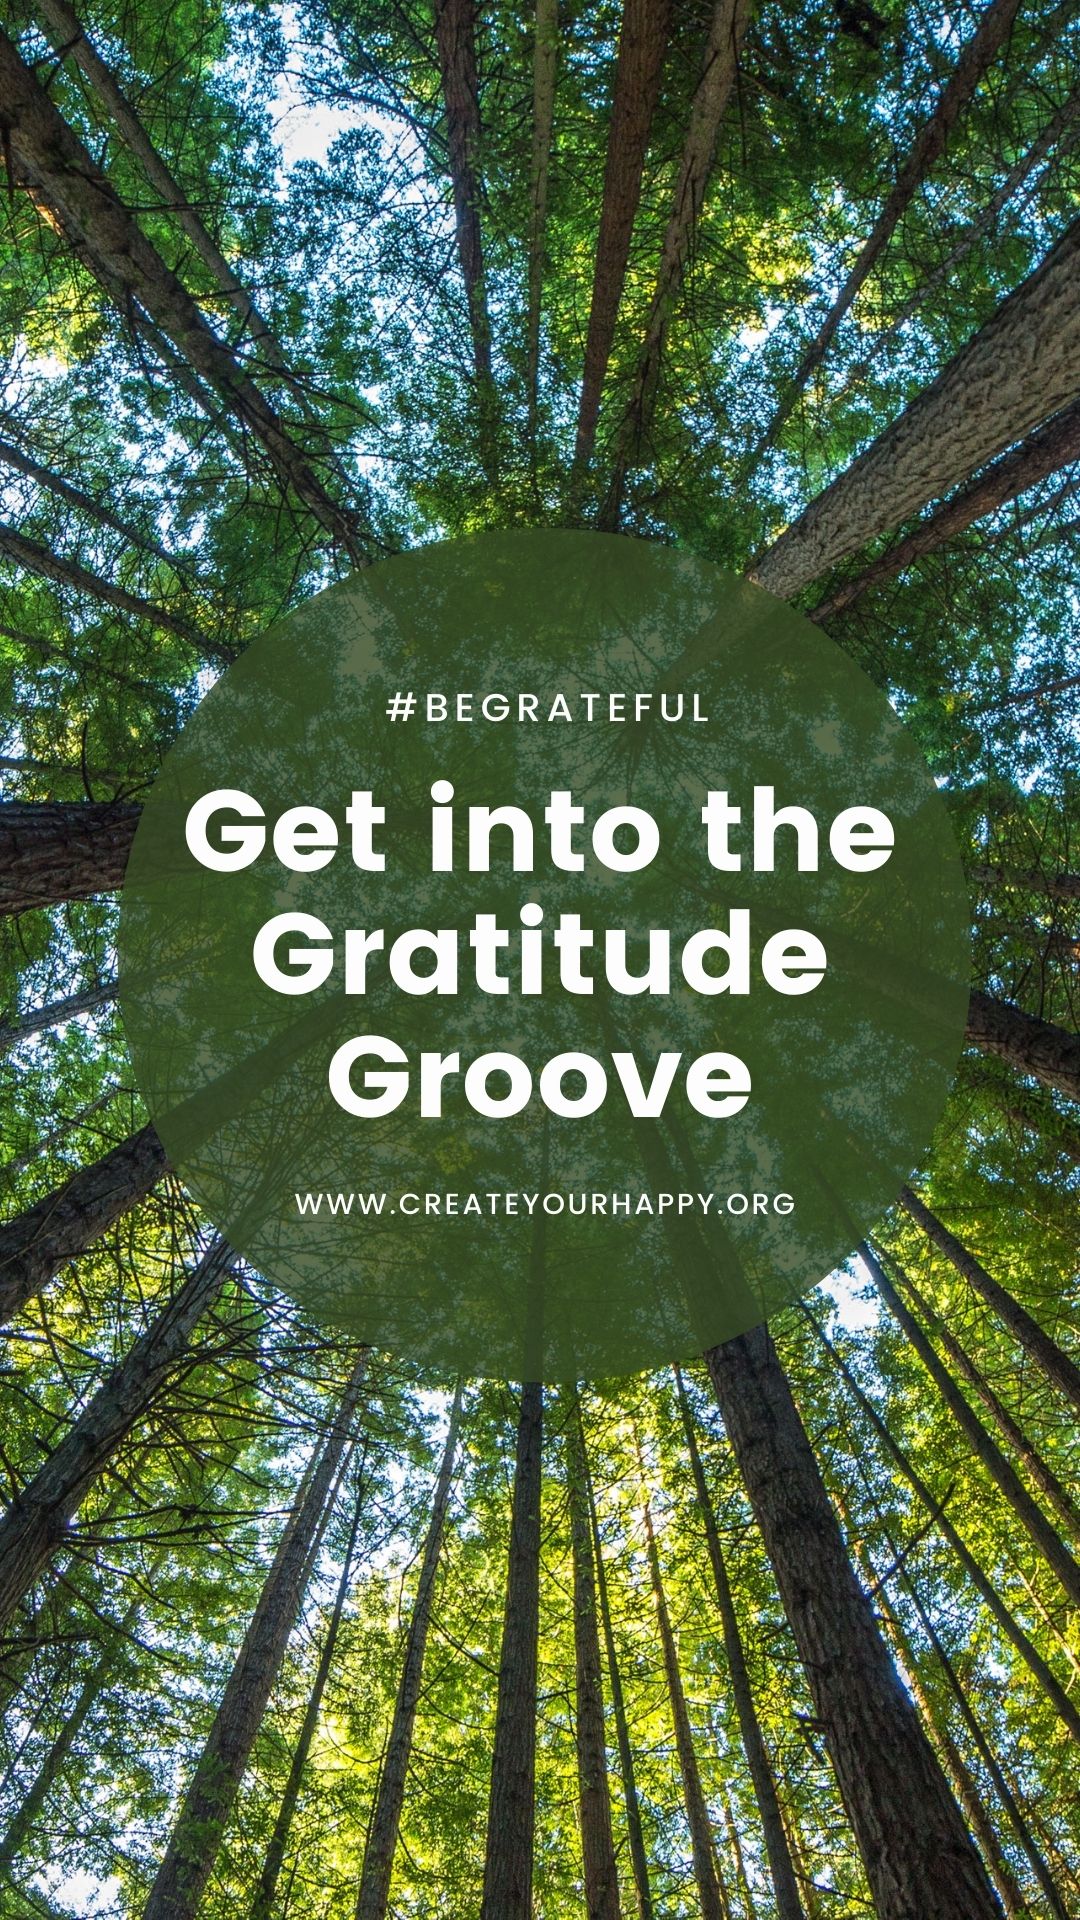 Get into the Gratitude Groove